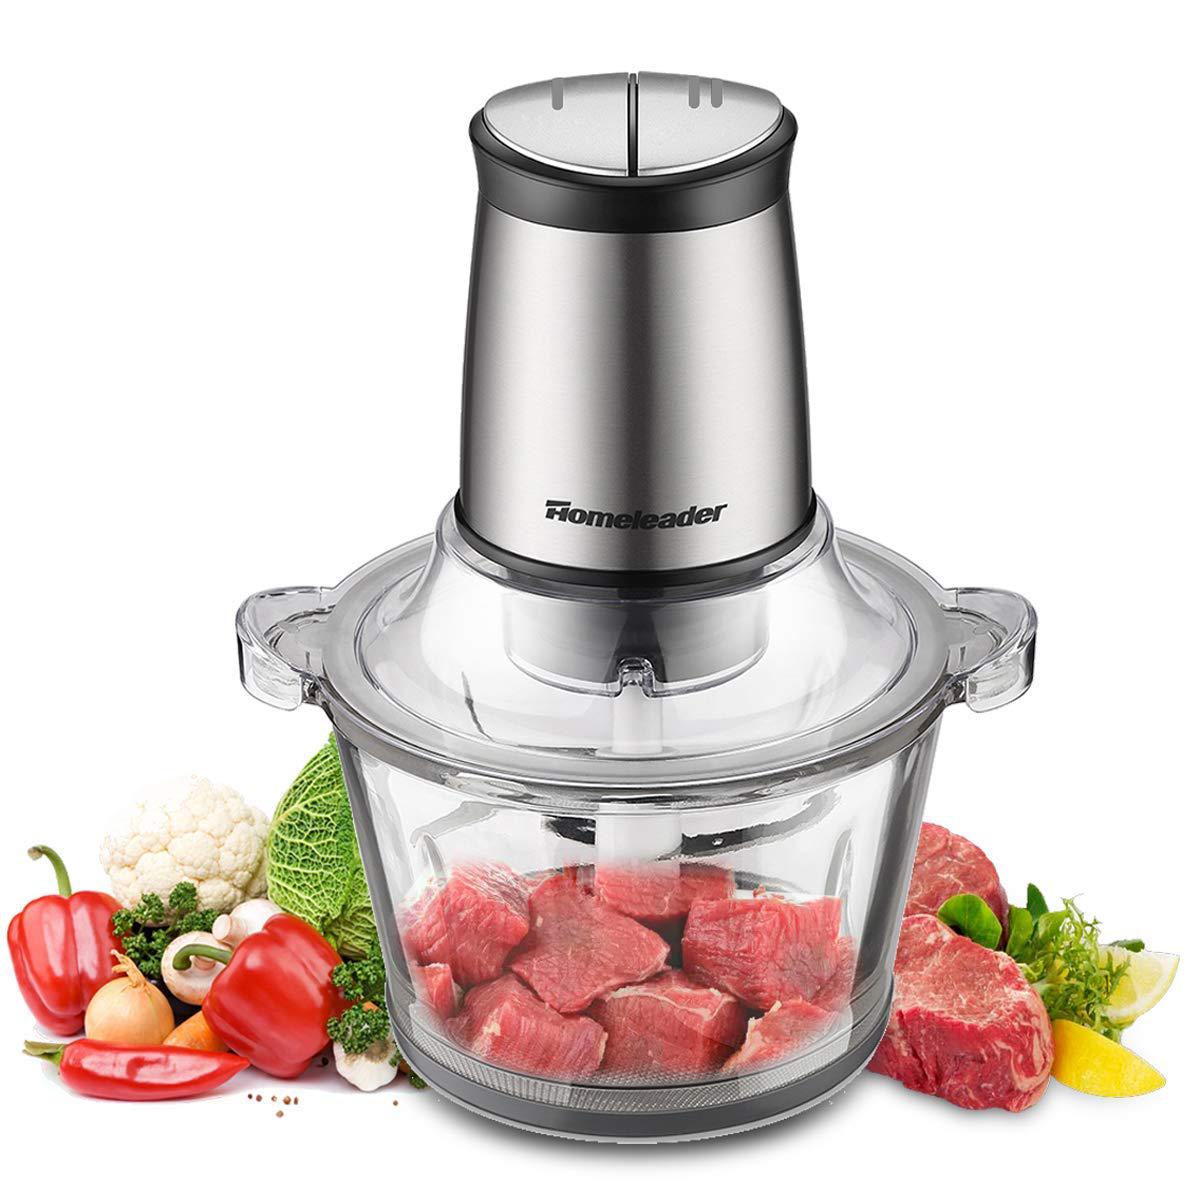 [US Direct] Electric Food Chopper, 8-Cup Food Processor by Homeleader, 2L BPA-Free Glass Bowl Blender Grinder for Meat, Vegetables, Fruits and Nuts, Fast & Slow 2-Speed, 4 Sharp Blades 31.5*19.6*21.1